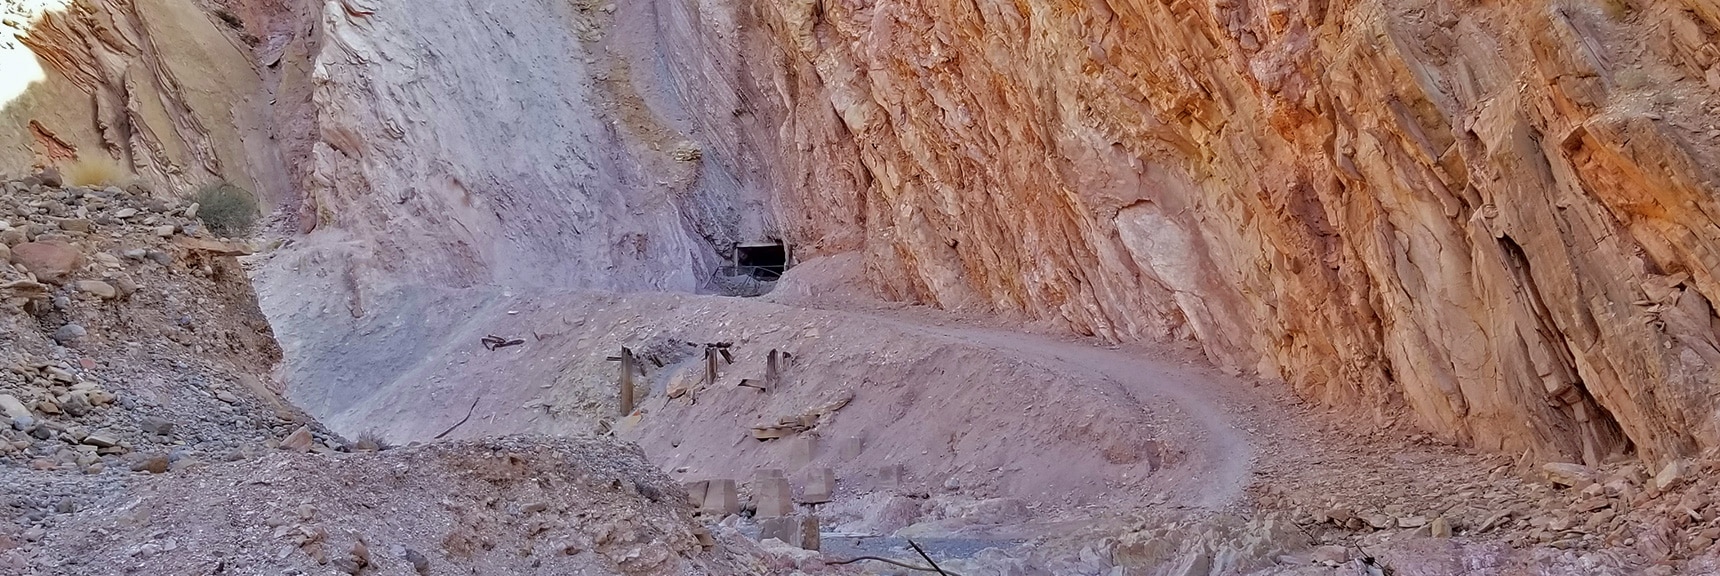 Abandoned Mine, Shaft Fenced Off | Anniversary Narrows | Muddy Mountains Wilderness, Nevada